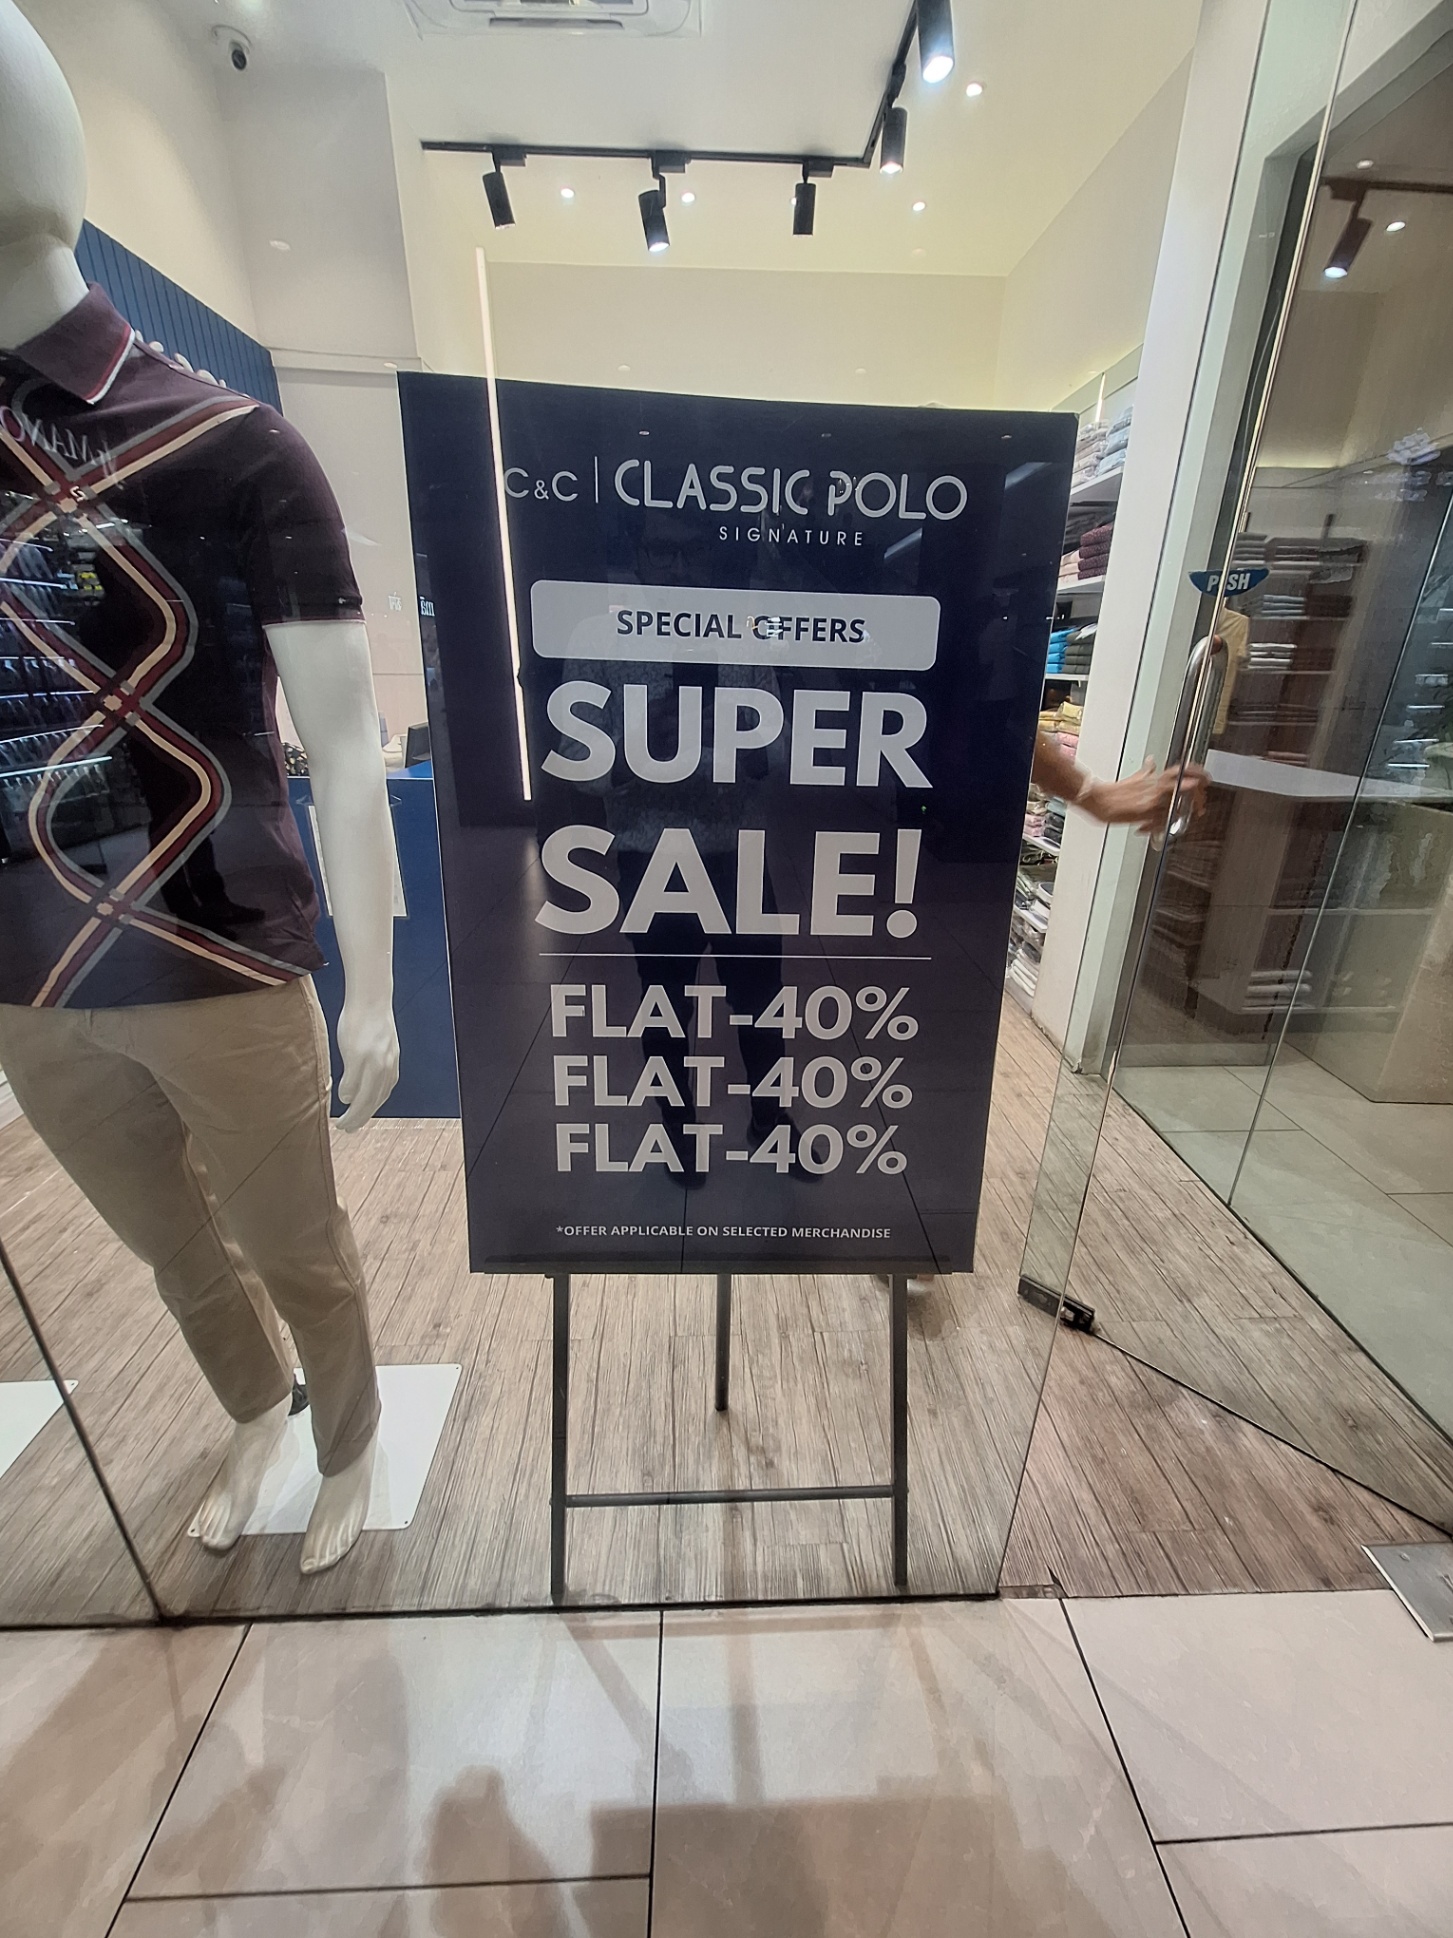 Upto 40% off Deal @C&C CLASSIC POLO, DB CITY , Bhopal